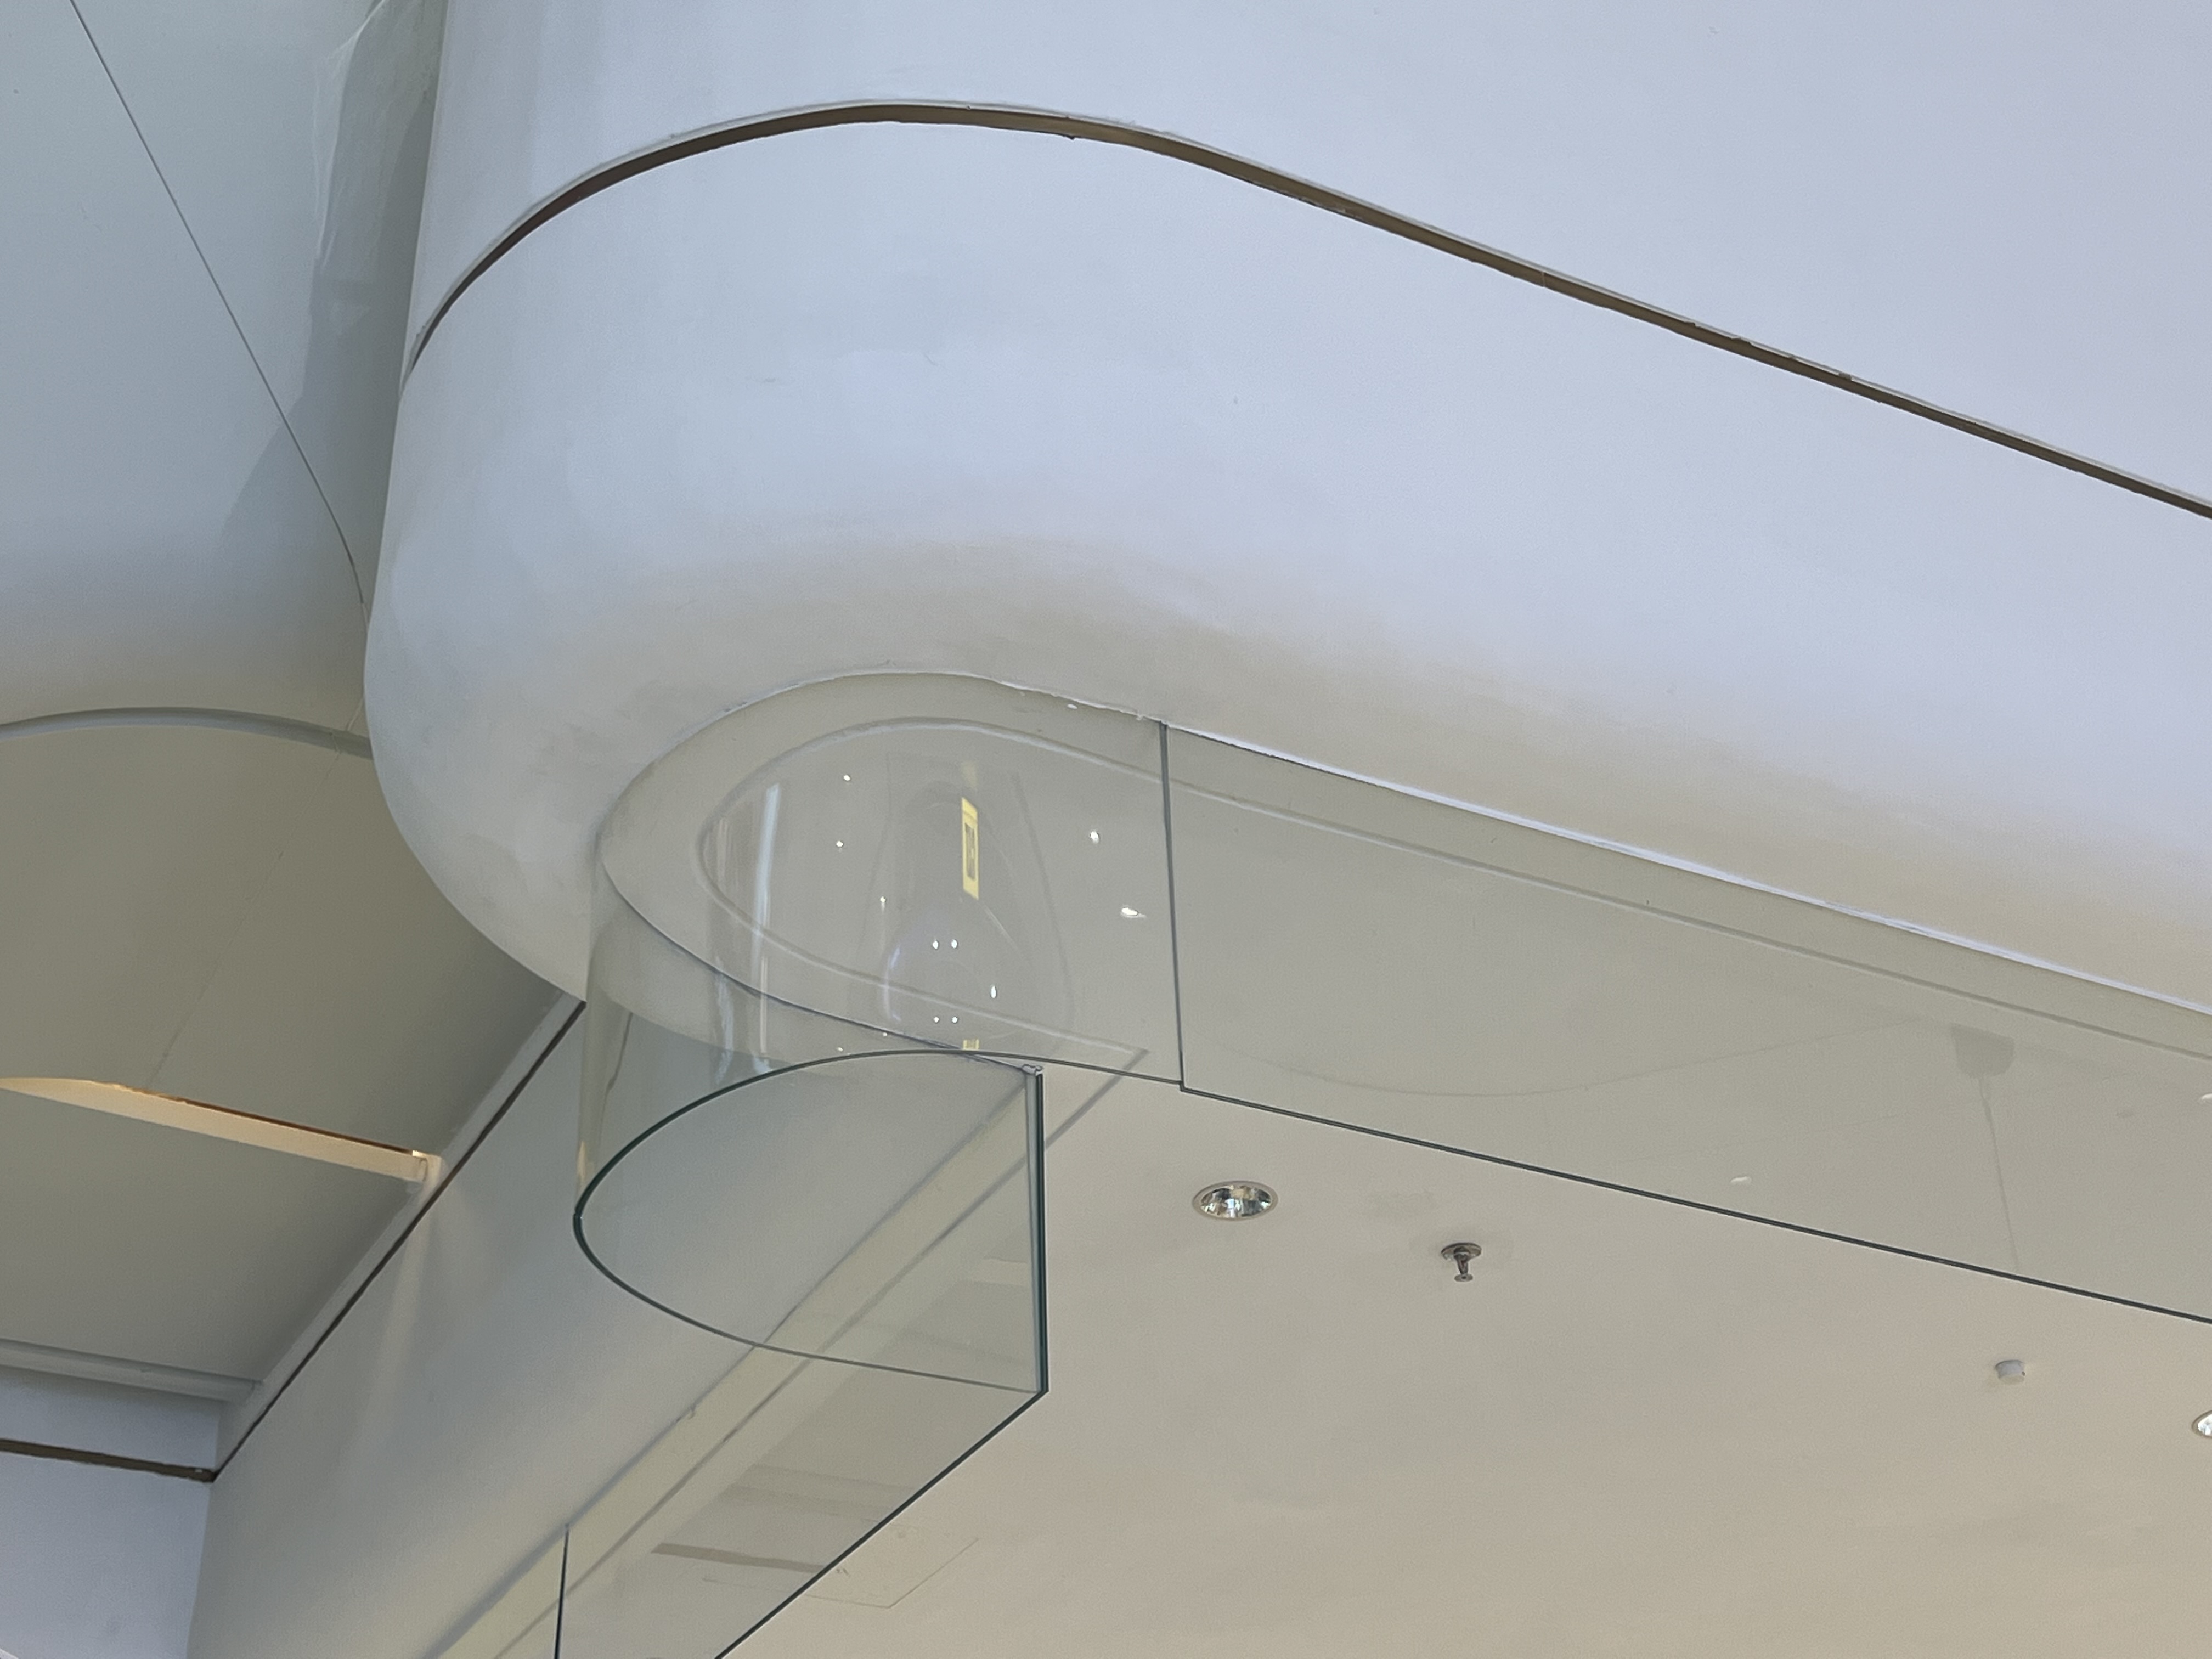 What Is The Vertical Glass Panel On The Ceiling Of The Shopping Mall?